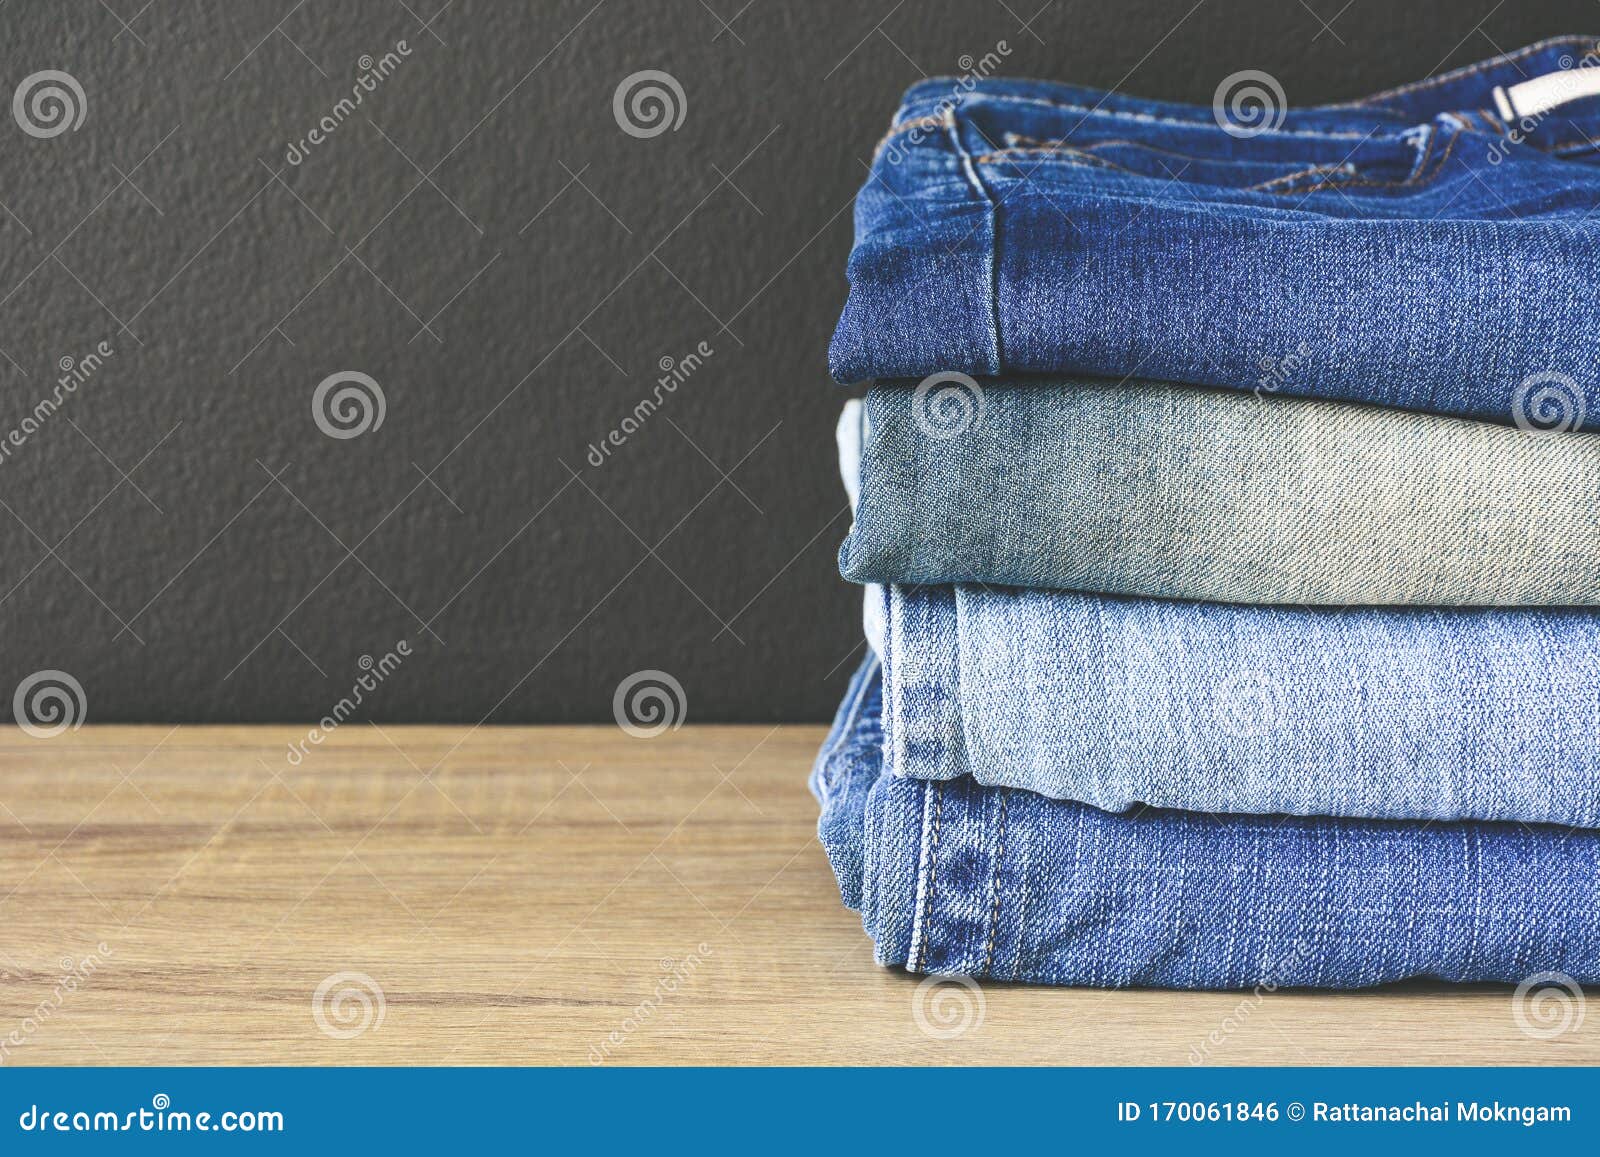 Close Up Stack of Folded Denim Blue Jeans on Wooden Table with Black ...